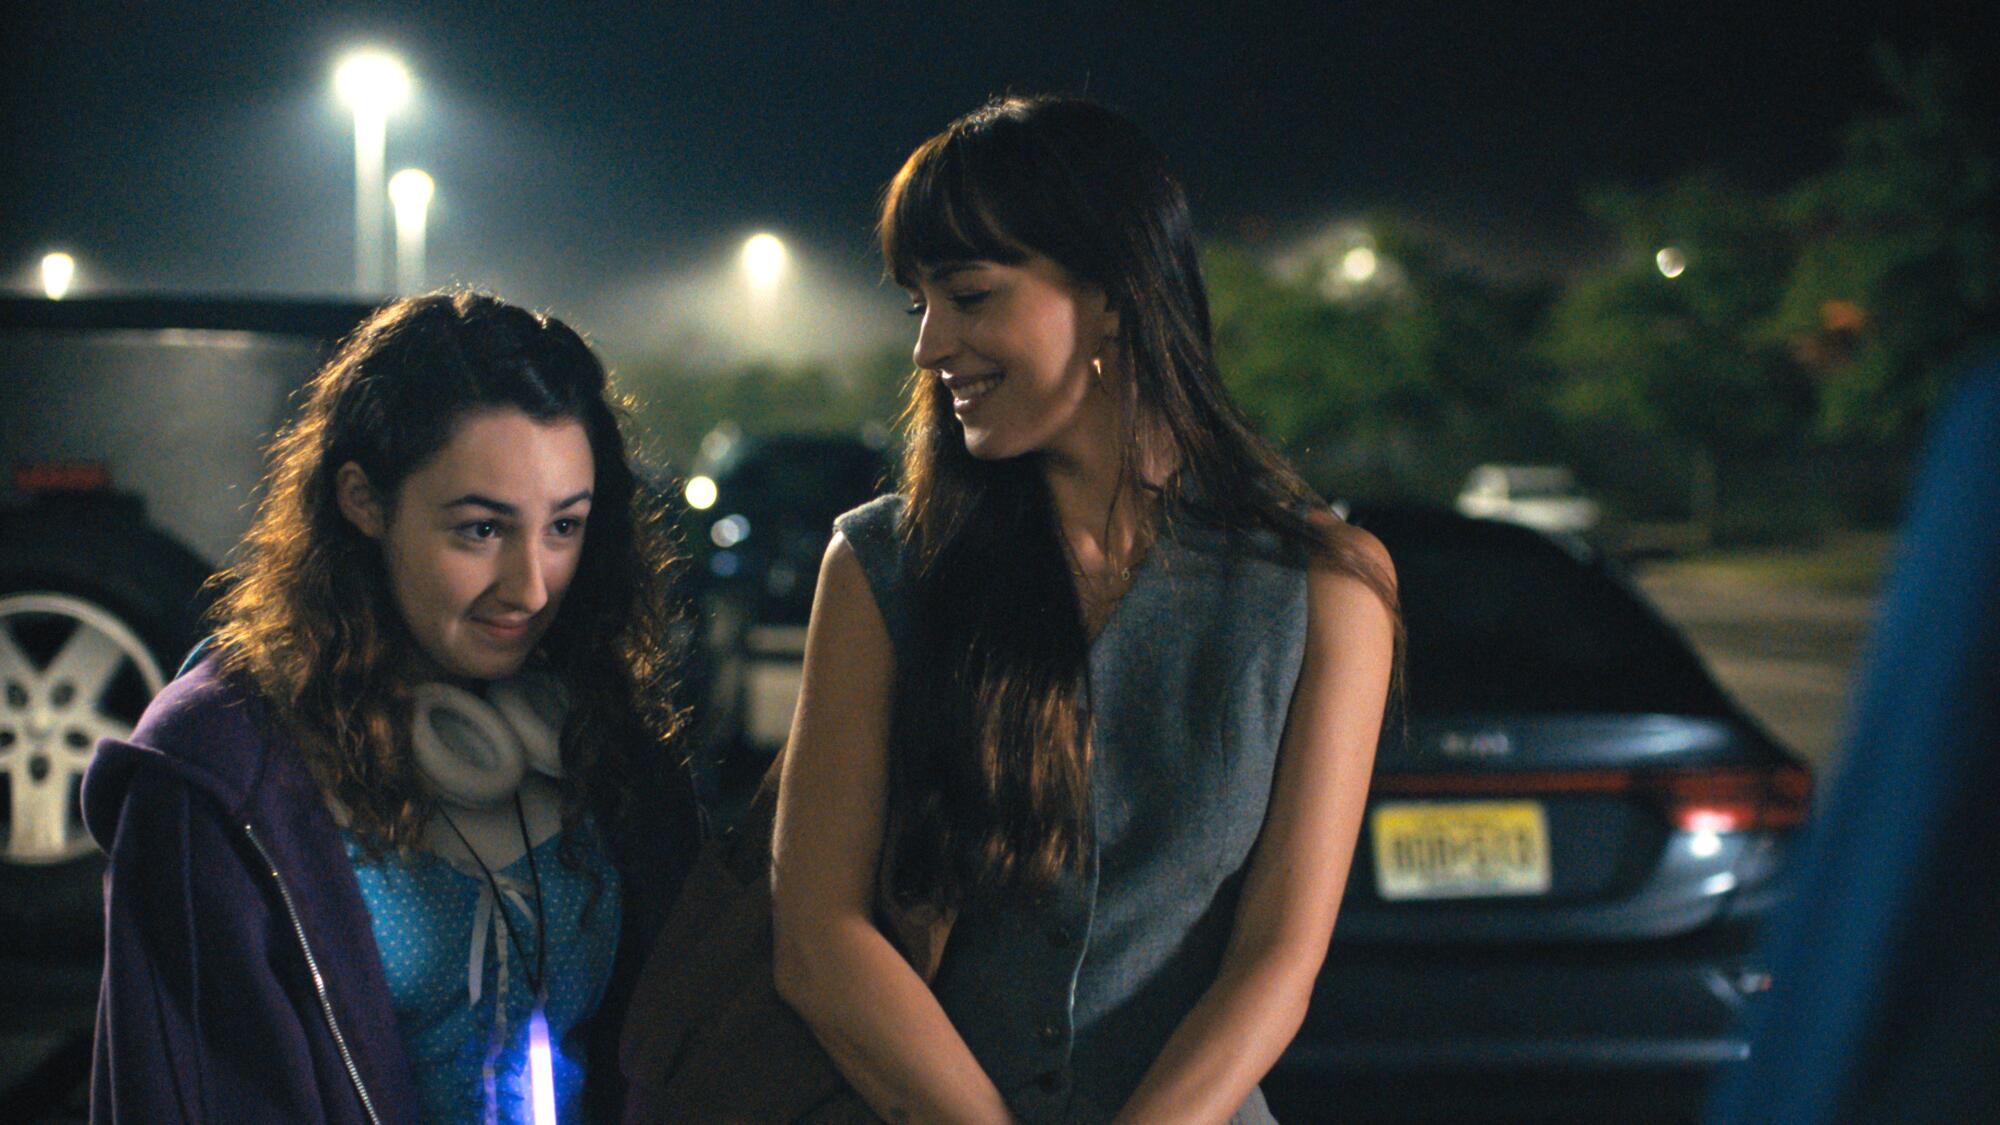 A woman smiles at a younger woman next to her in a parking lot.